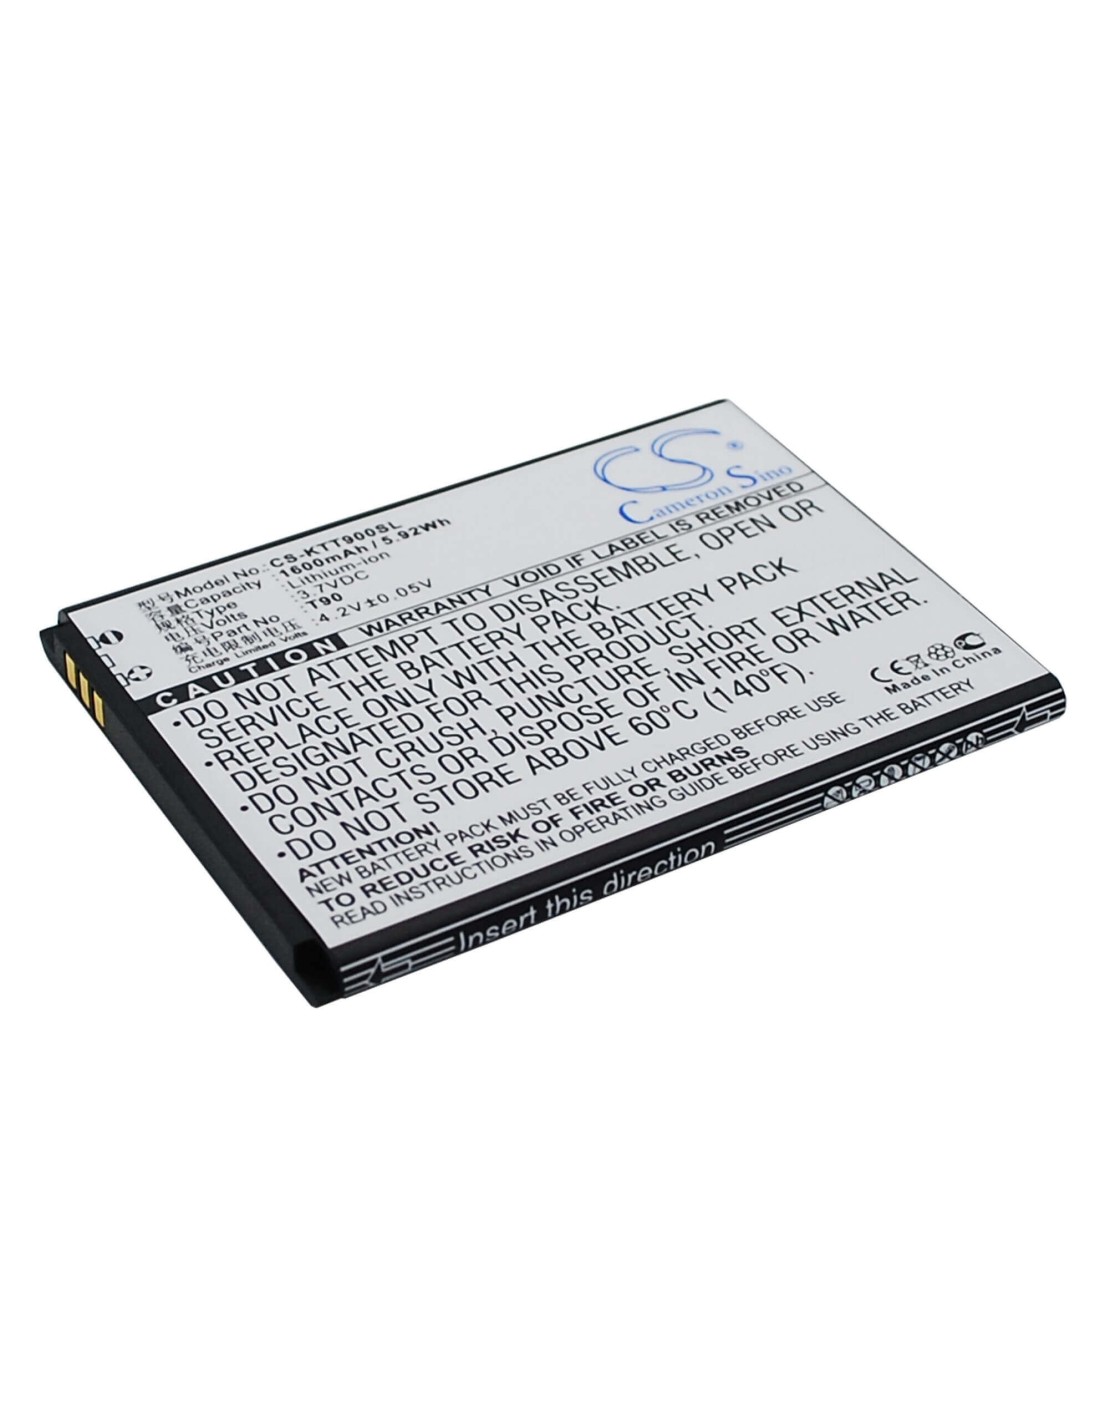 Battery for K-Touch T90 3.7V, 1600mAh - 5.92Wh